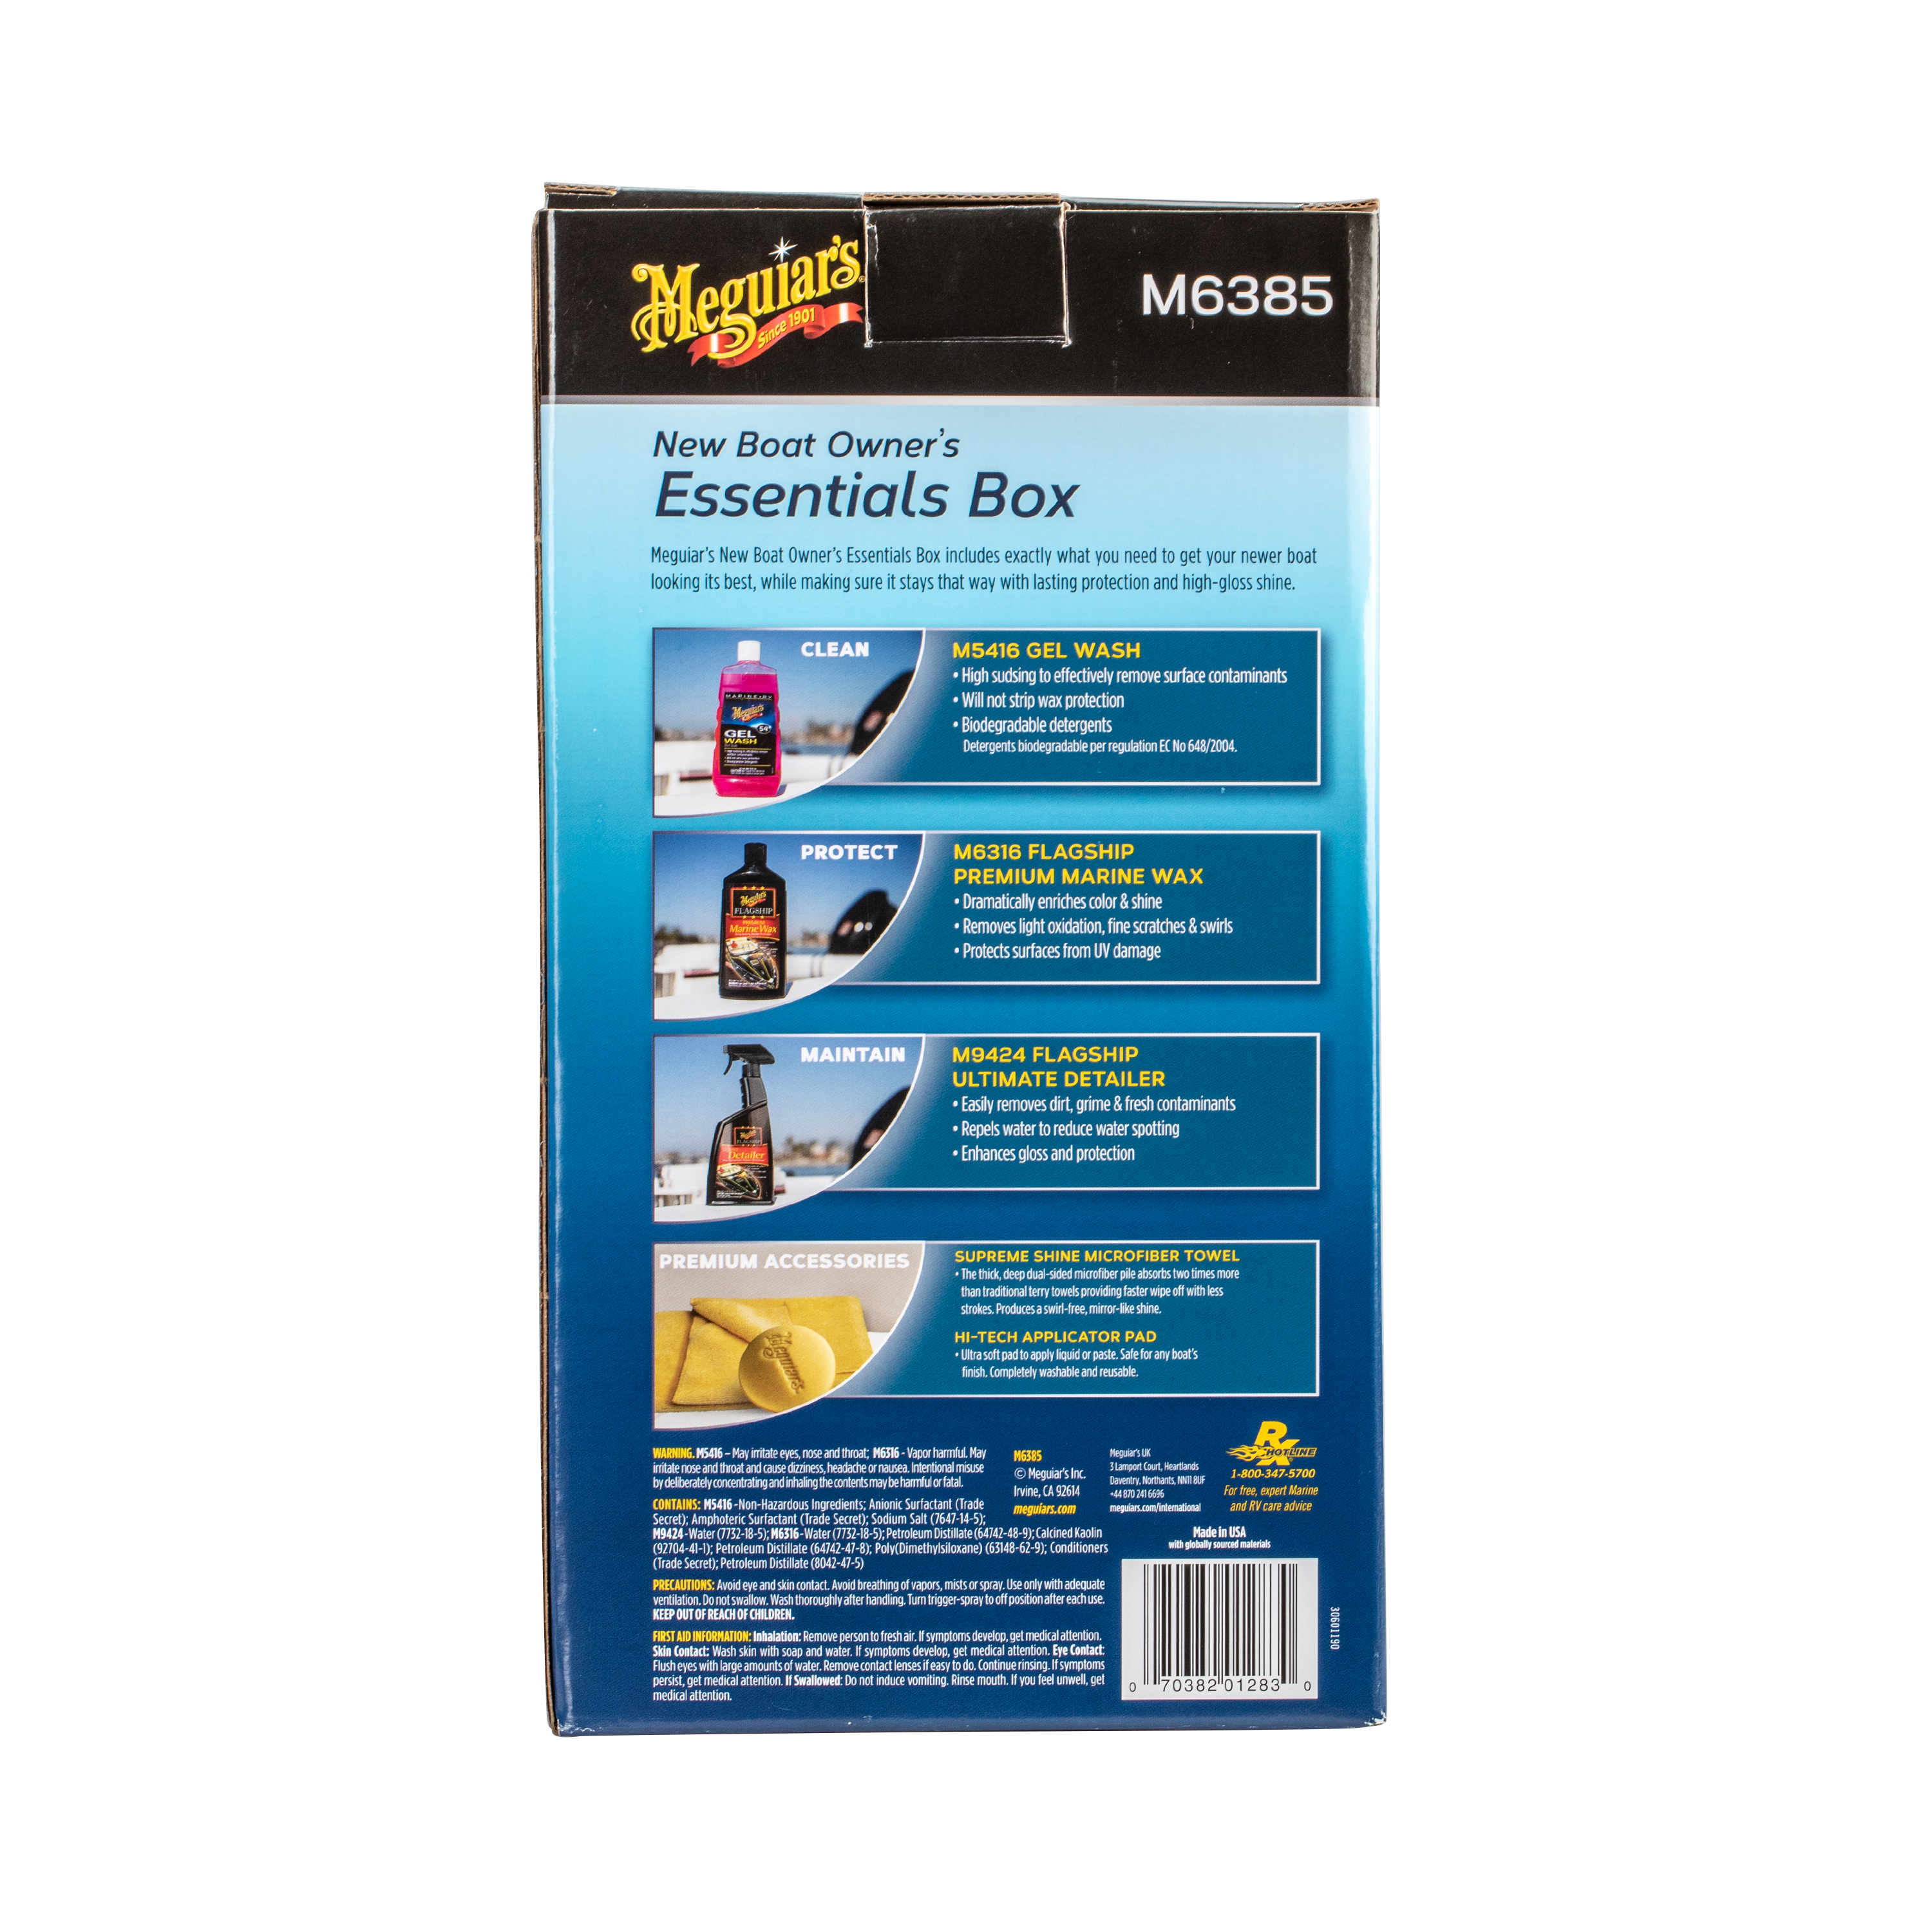 Meguiar’s M6385 Marine/RV Care New Boat Owner’s Essentials Box Kit, 1 Pack - image 5 of 9